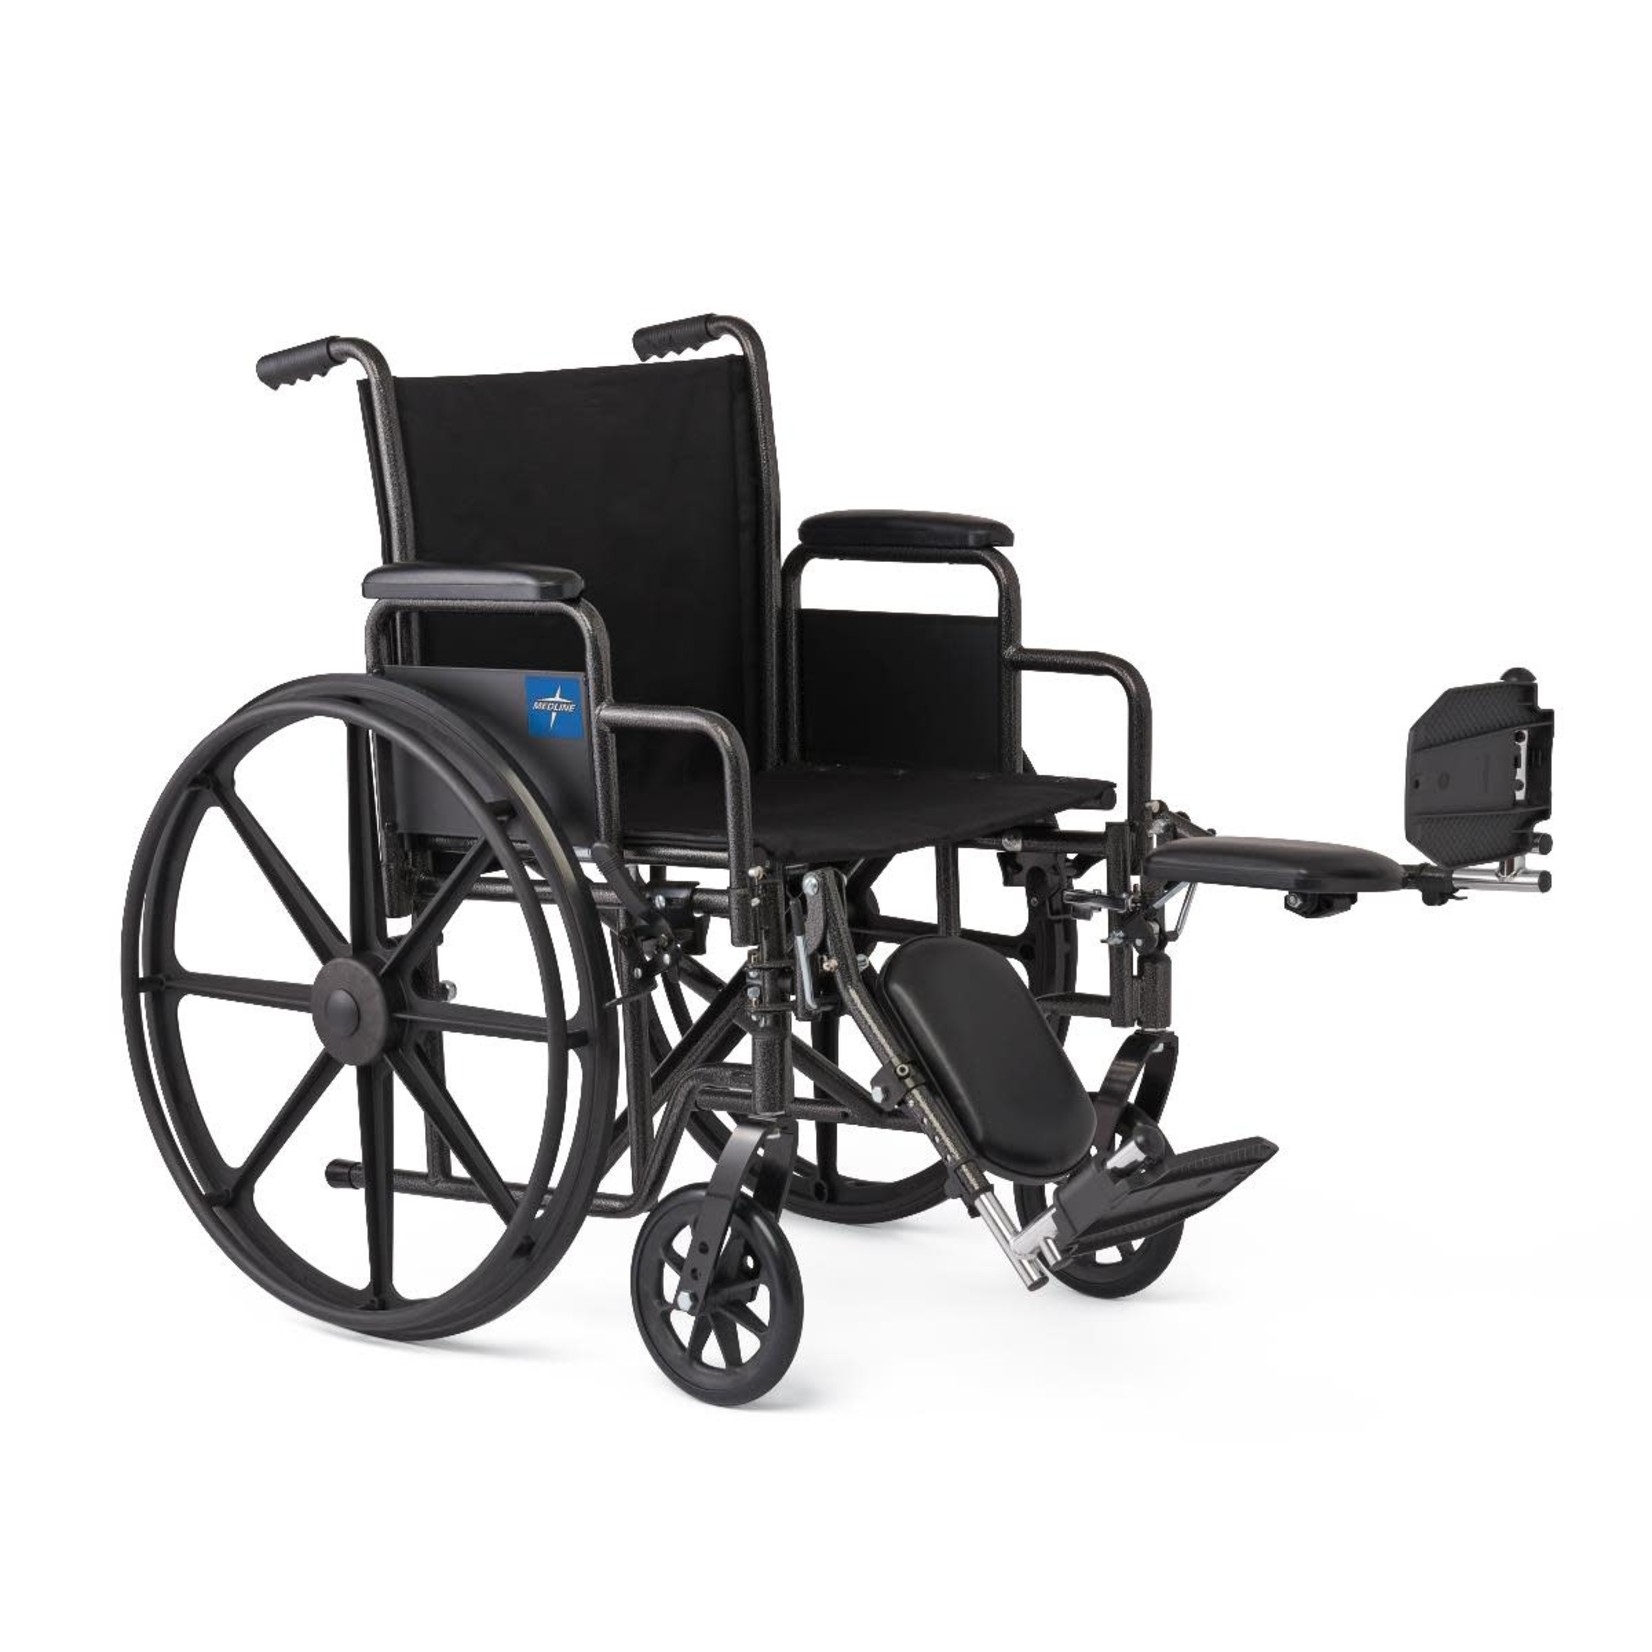 Wheelchairs: K1 Basic Wheelchair with Swing-Back Desk-Length Arms and Elevating Leg Rests, 18"